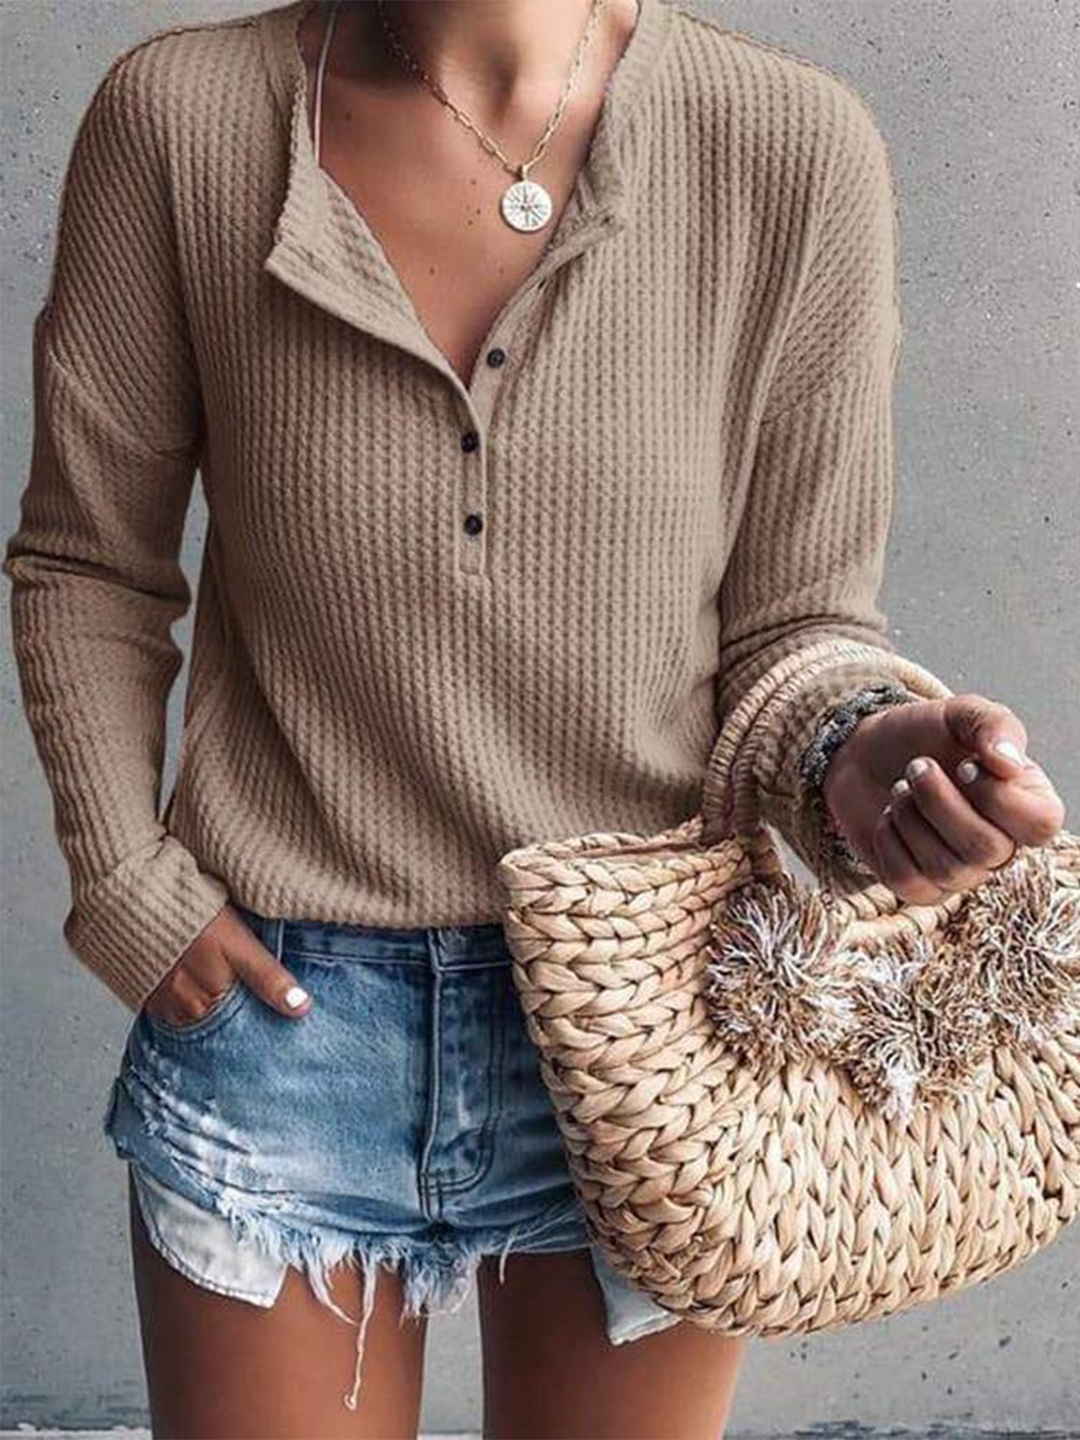 Women Waffle Knit Tunic Tops Long Sleeve Button Pullover Shirts Tee